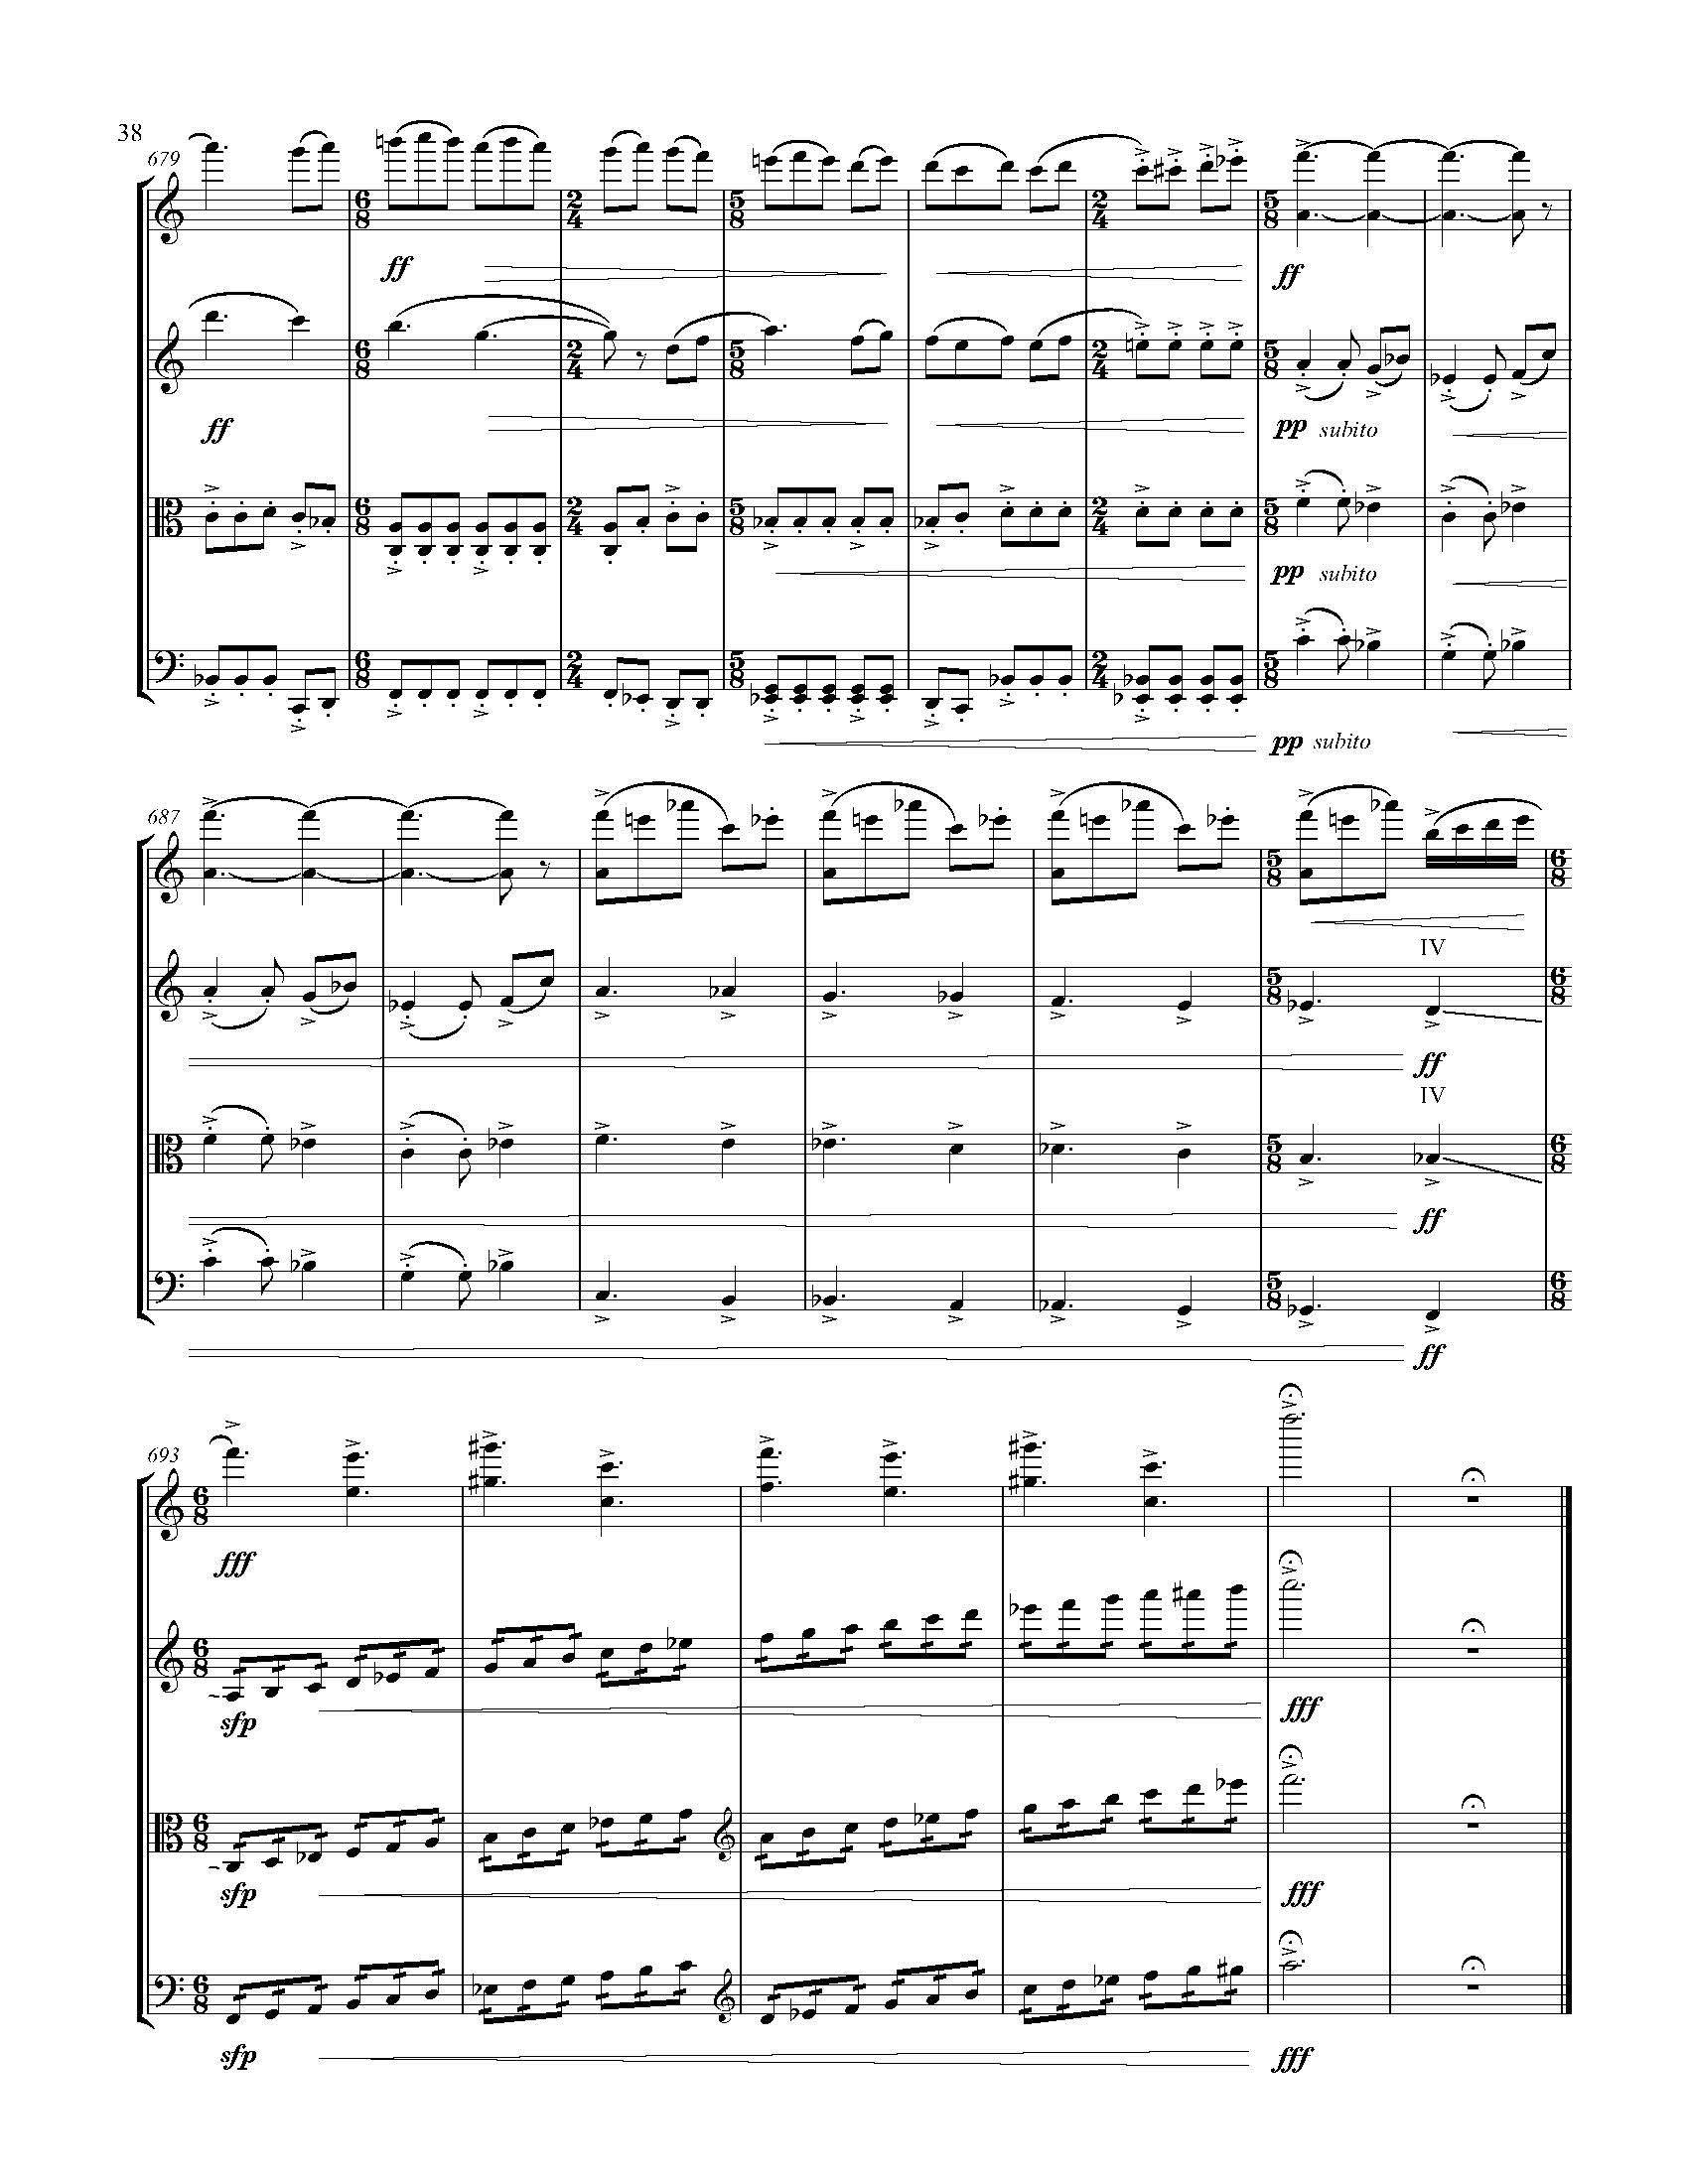 A Country of Vast Designs - Complete Score_Page_44.jpg